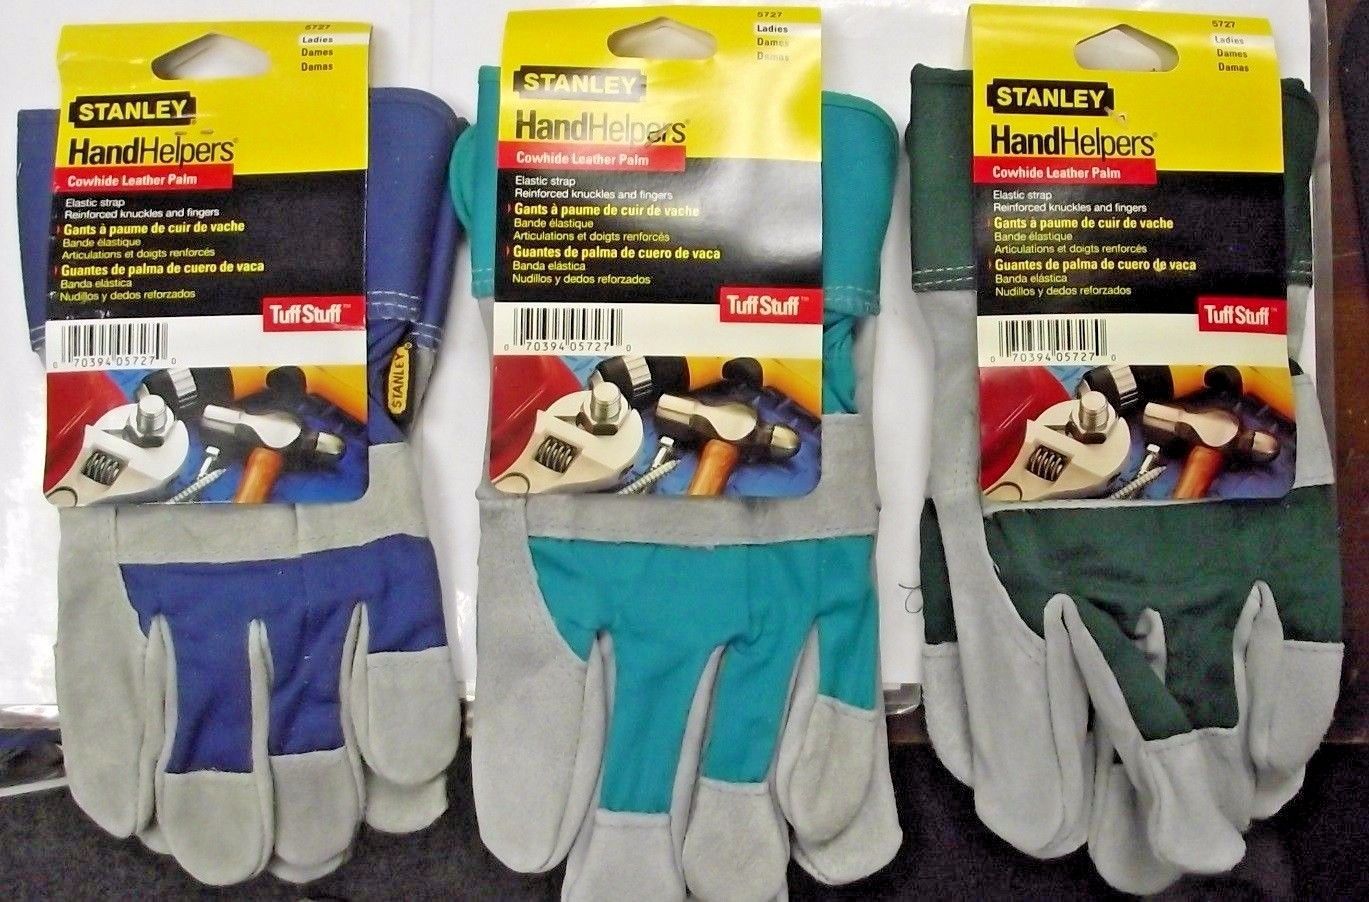 Stanley 5727 Ladies Cowhide Leather Palm Gloves, Assorted Colors, On Pair